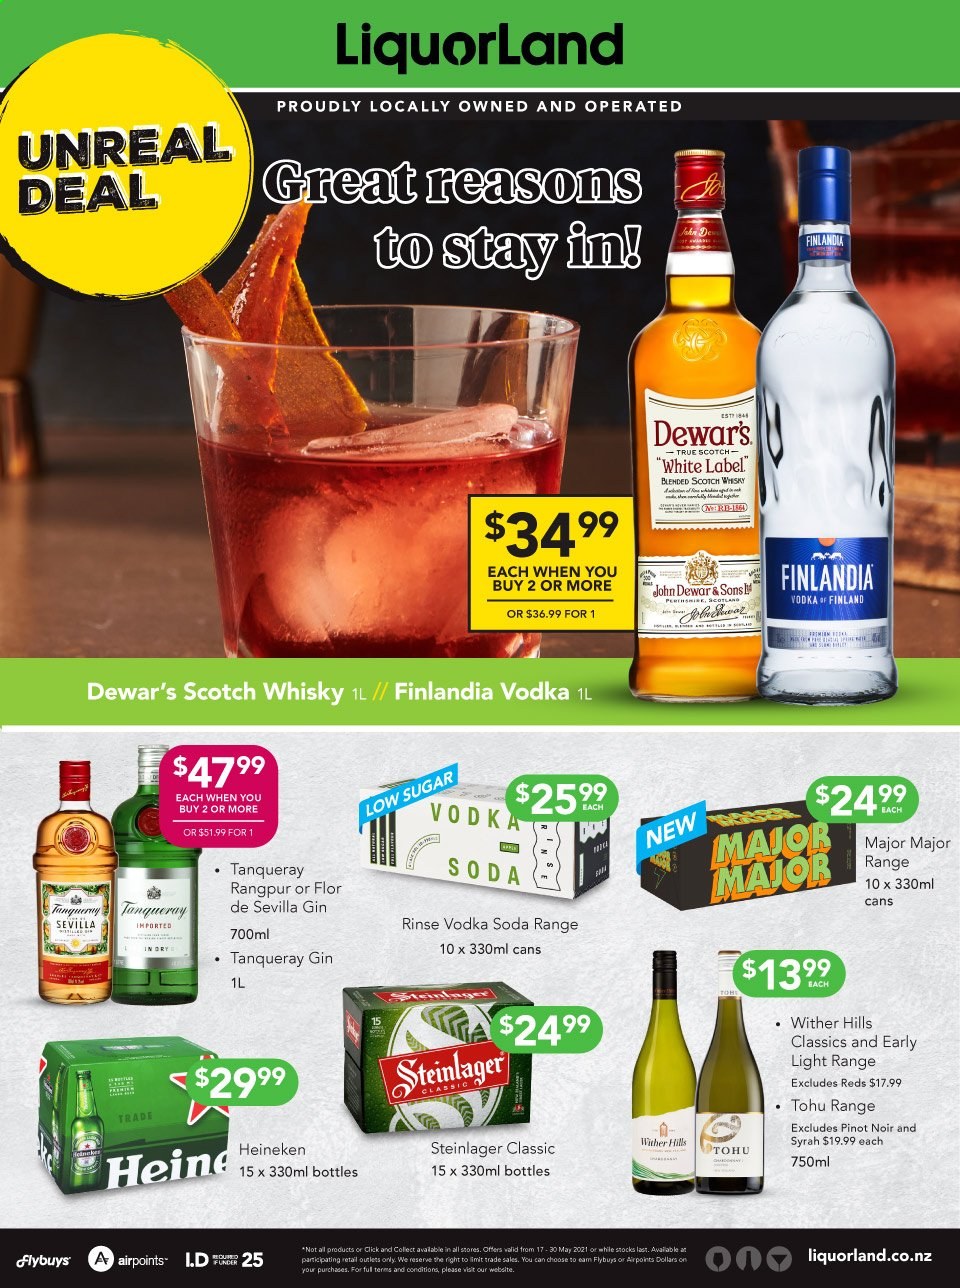 thumbnail - Liquorland mailer - 17.05.2021 - 30.05.2021 - Sales products - soda, red wine, wine, Pinot Noir, Wither Hills, Syrah, gin, vodka, scotch whisky, whisky, beer, Heineken, Steinlager. Page 1.